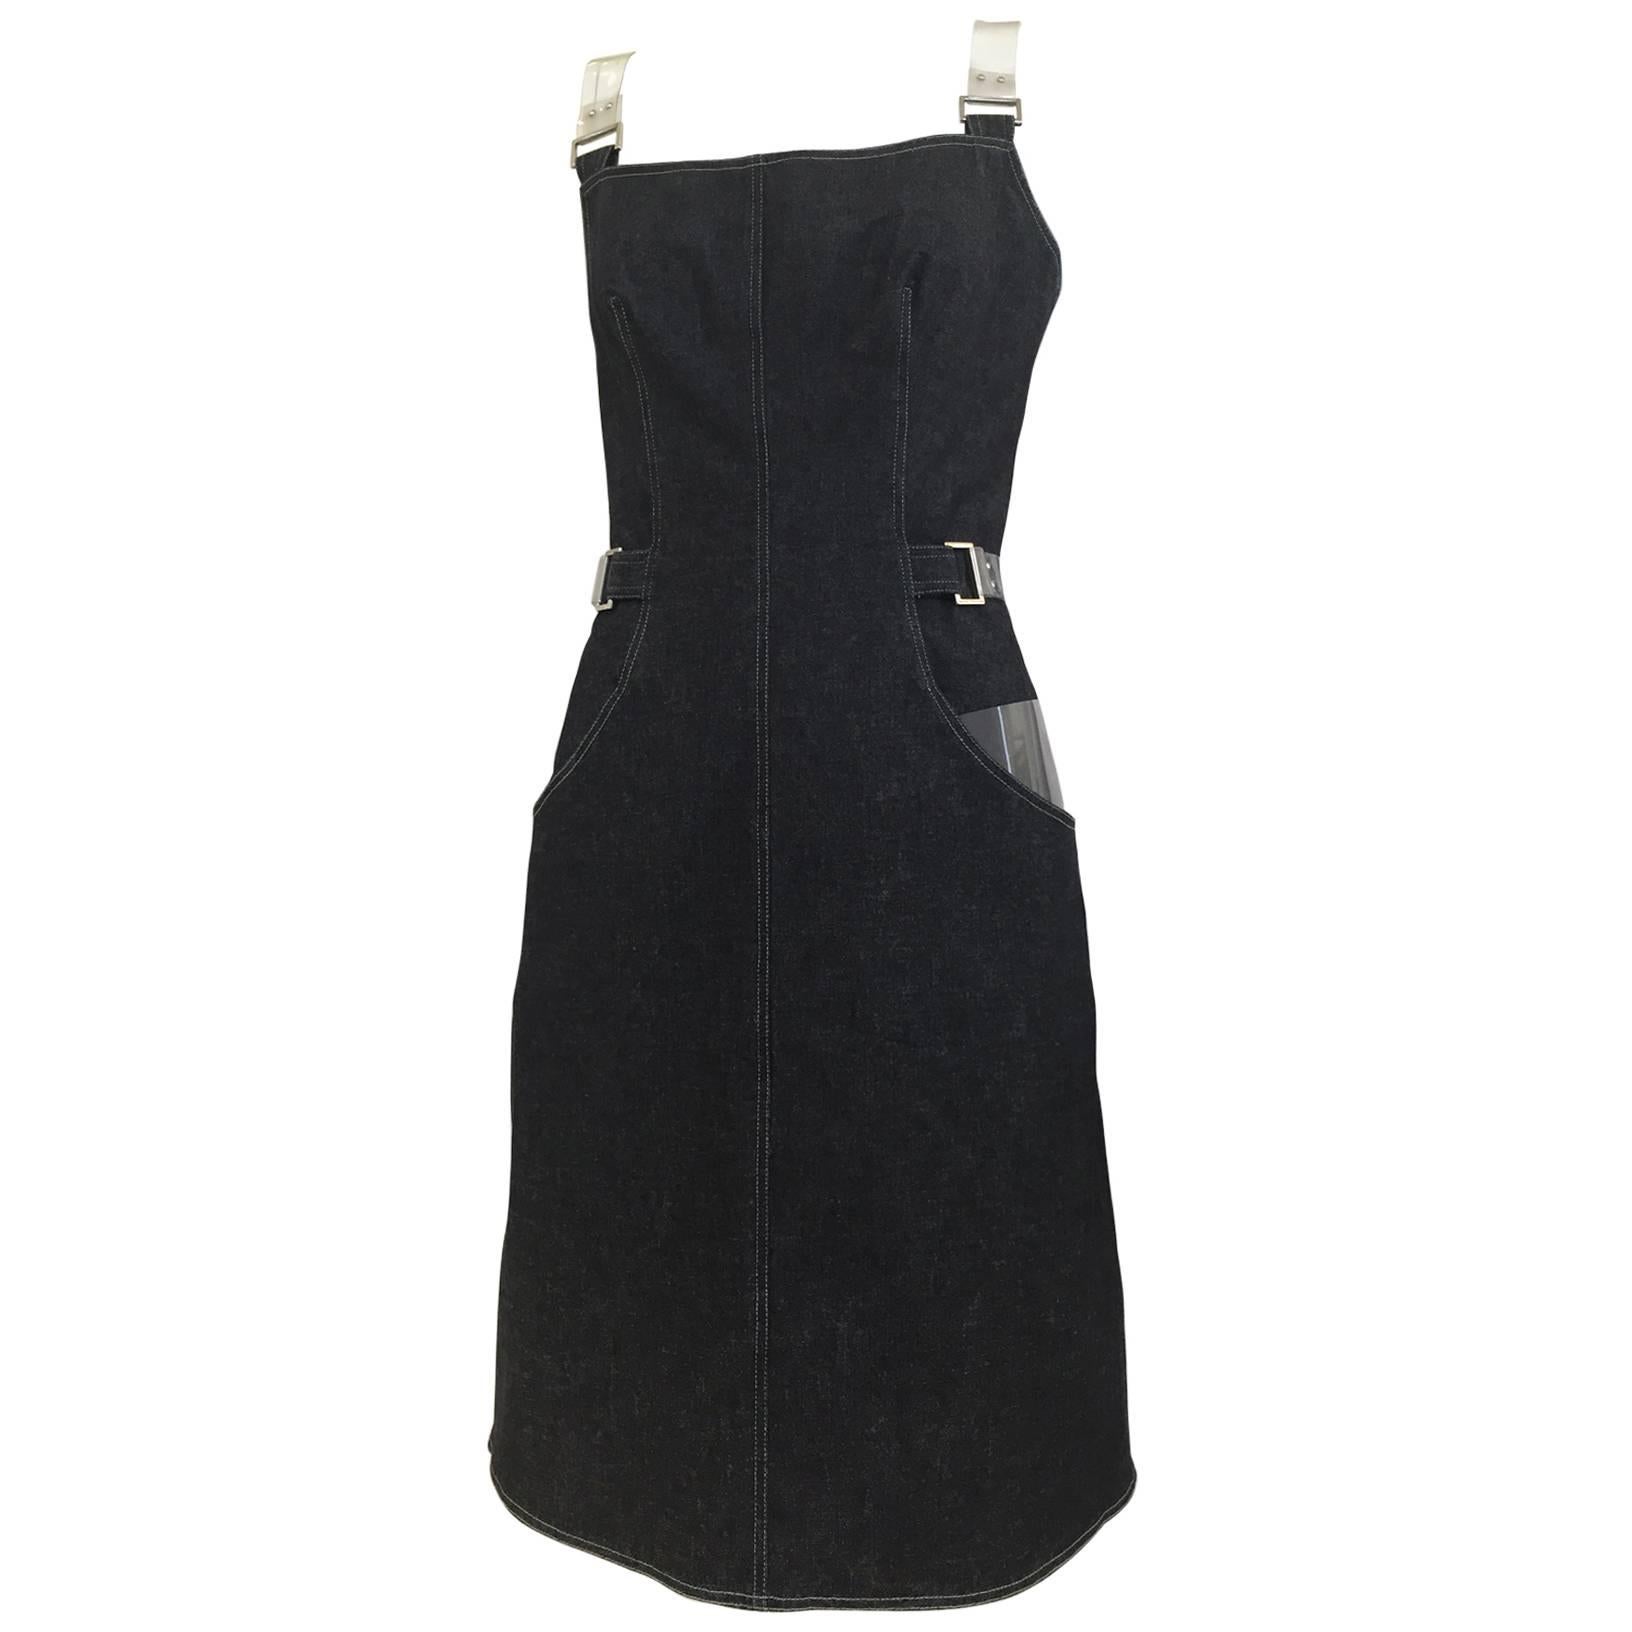  Paco Rabanne denim dress with clear plastic strap and belt